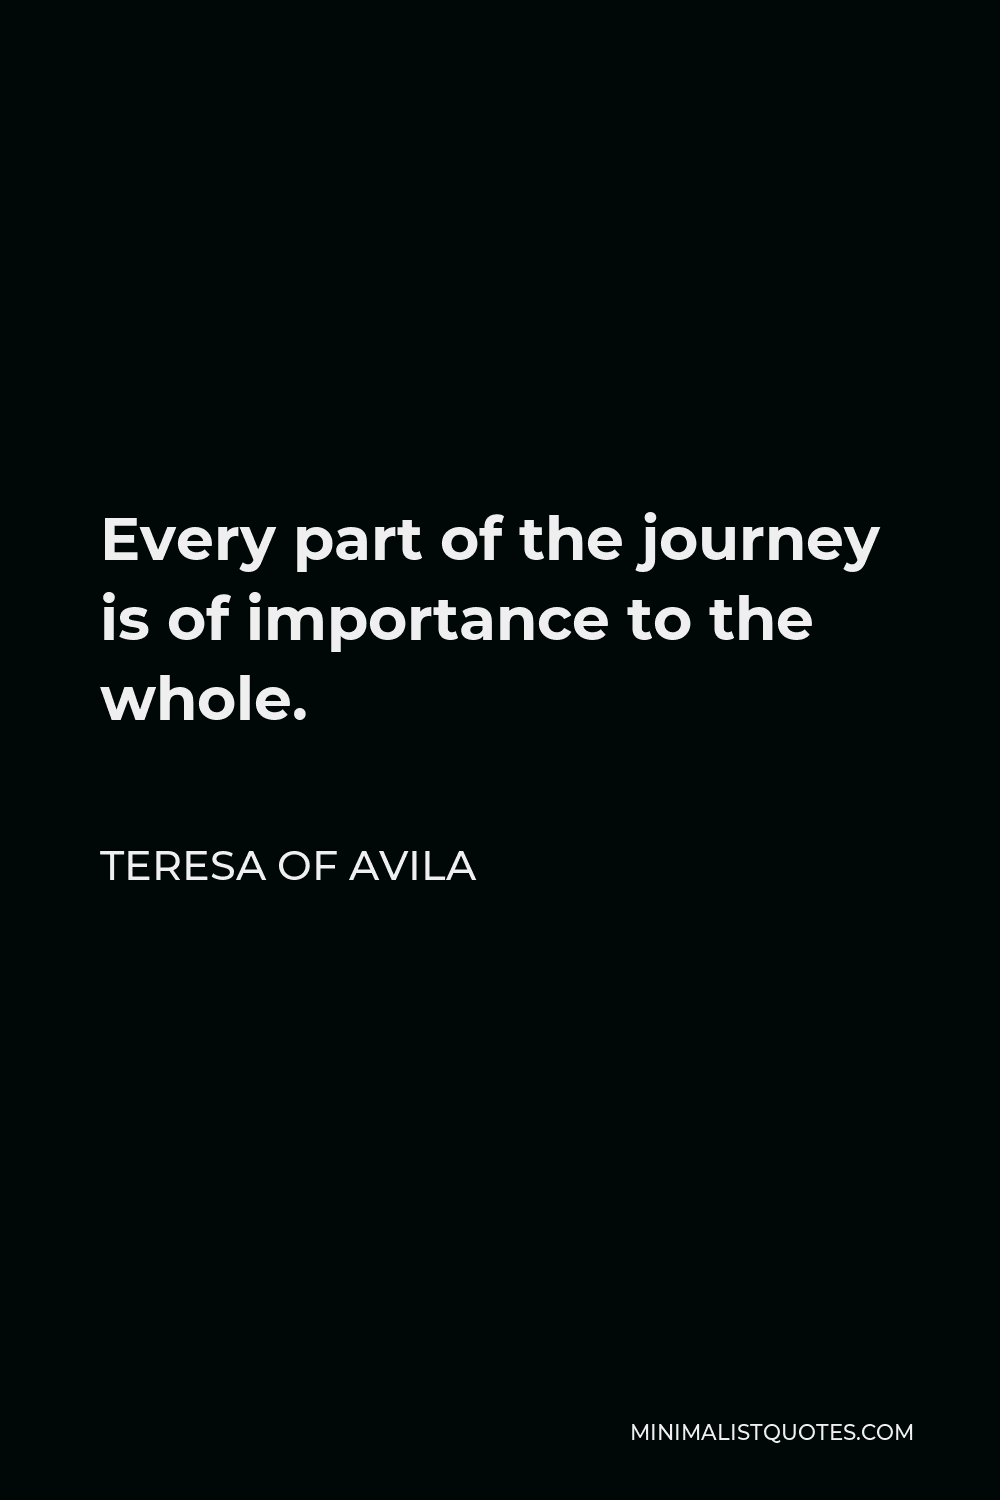 Teresa of Avila Quote - Every part of the journey is of importance to the whole.